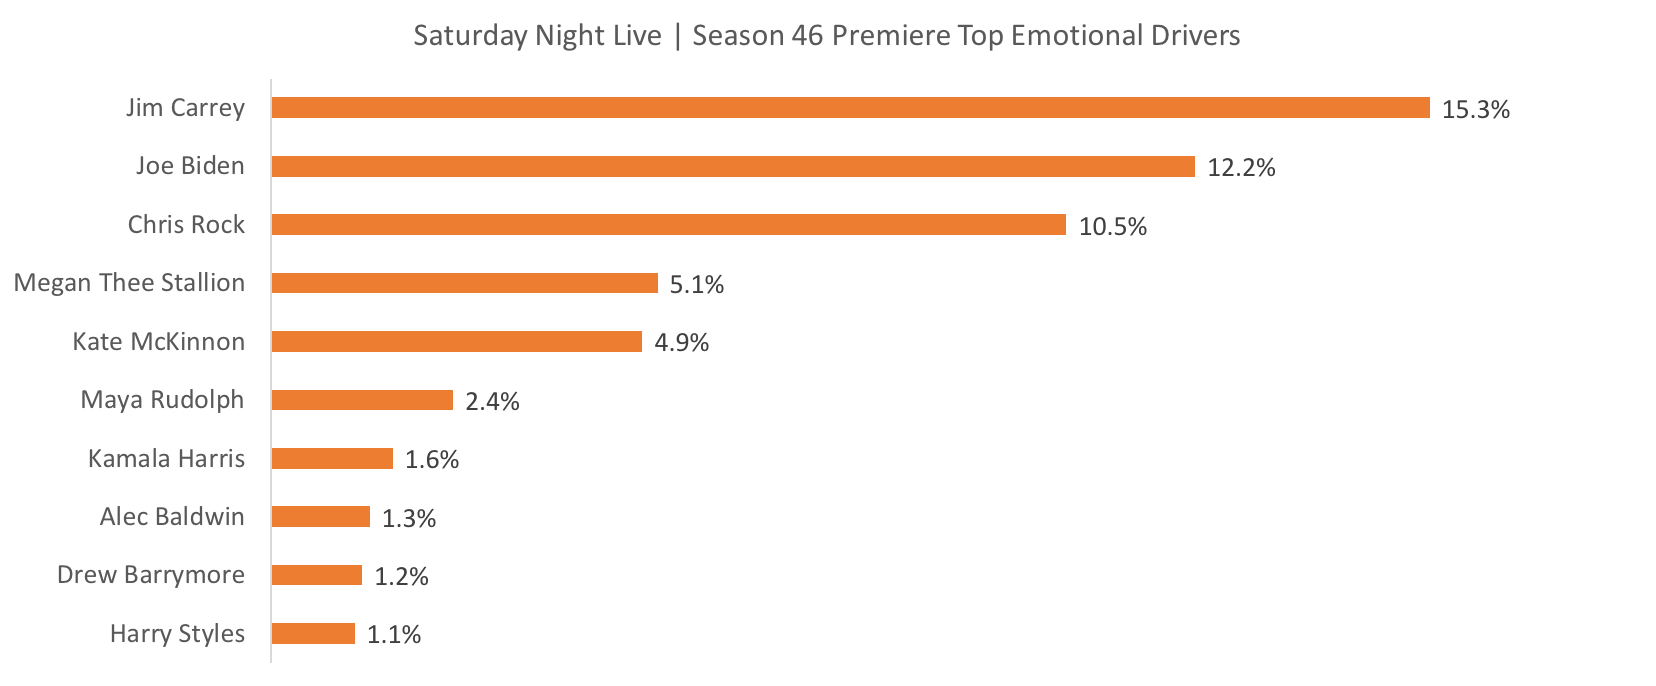 Source: Canvs, Top Emotional Drivers for Saturday Night Live from October 3 - 4